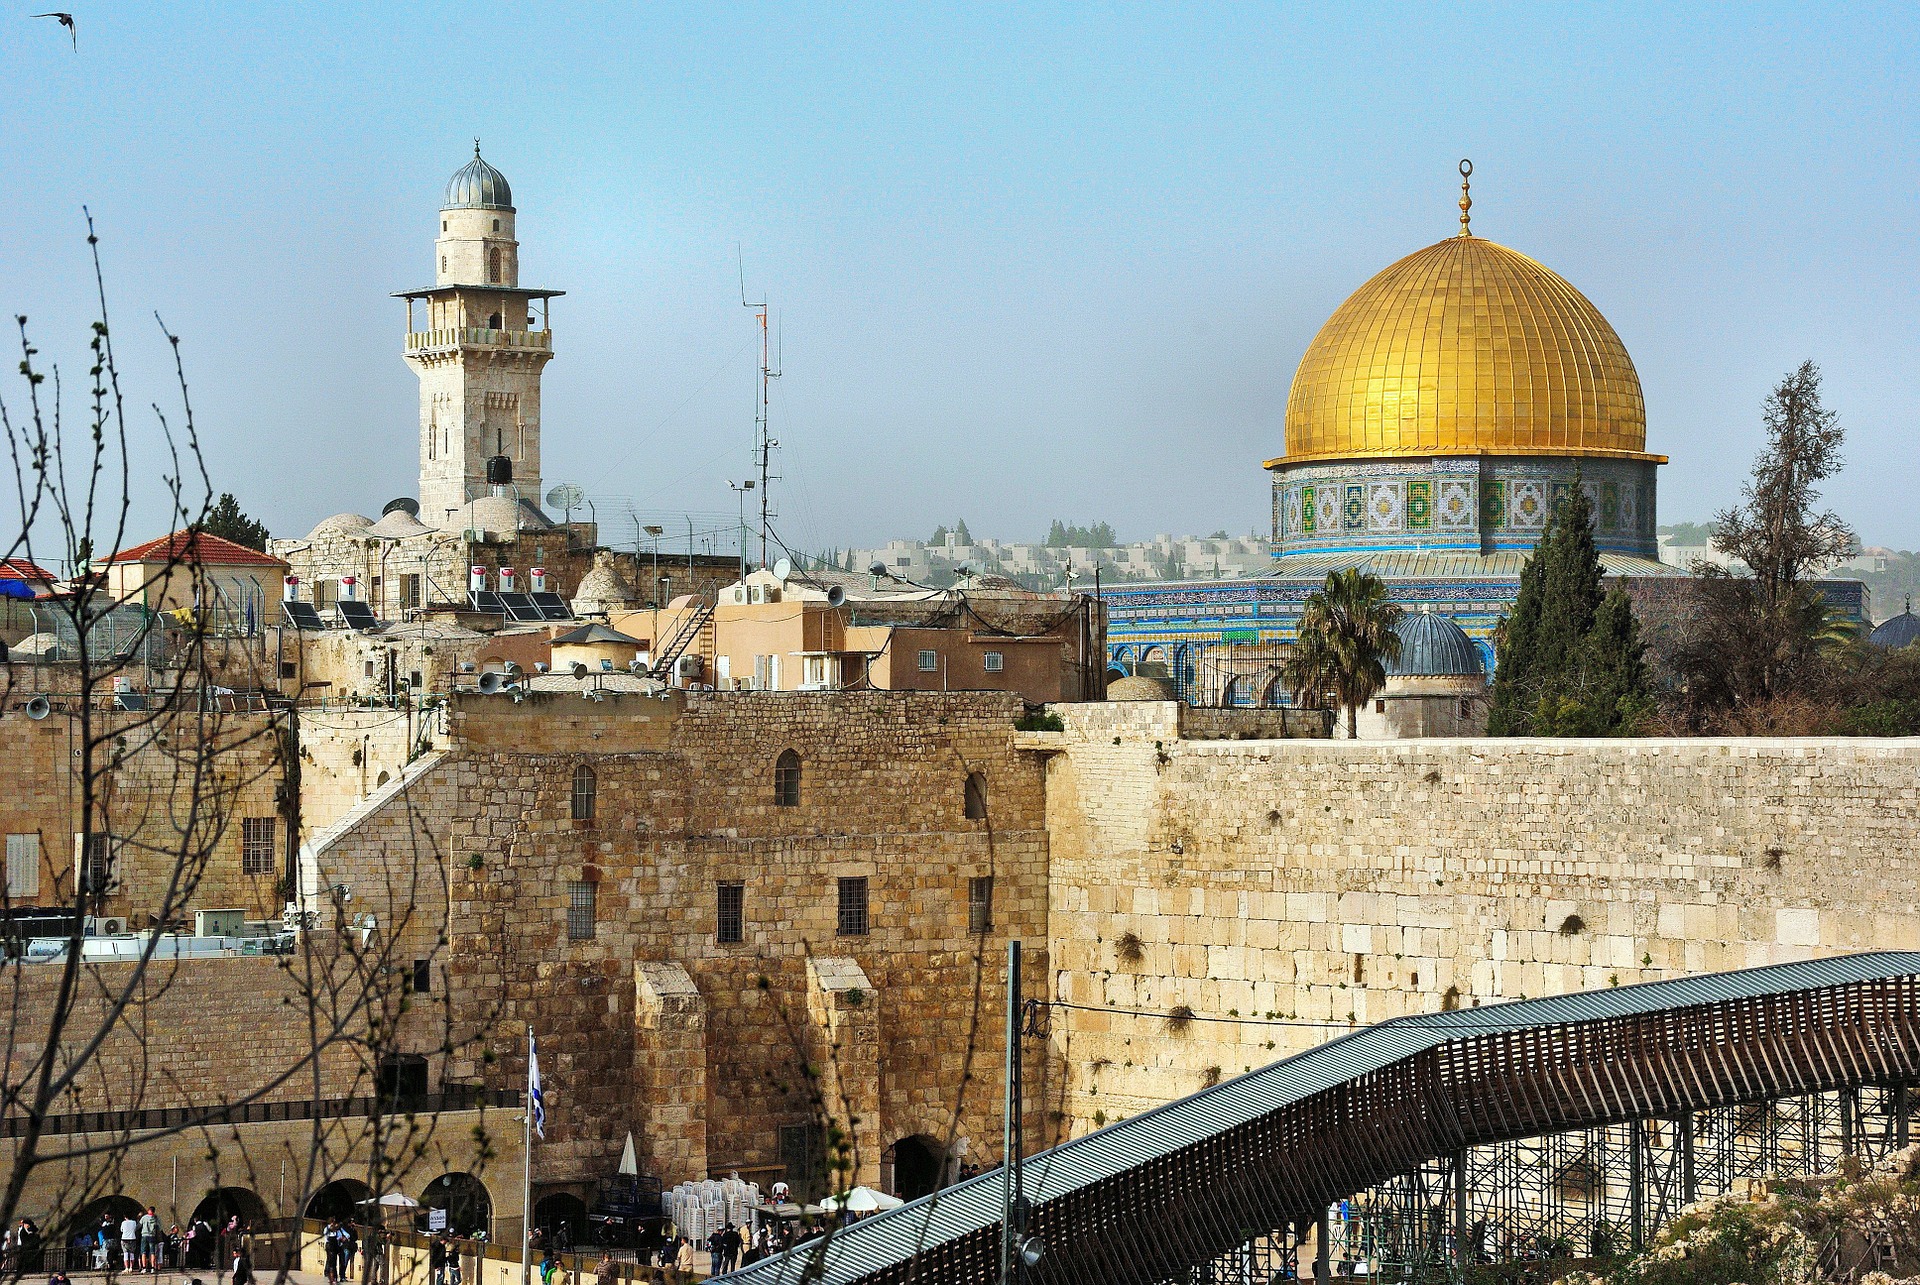 From-damascus-gate-to-zion-gate